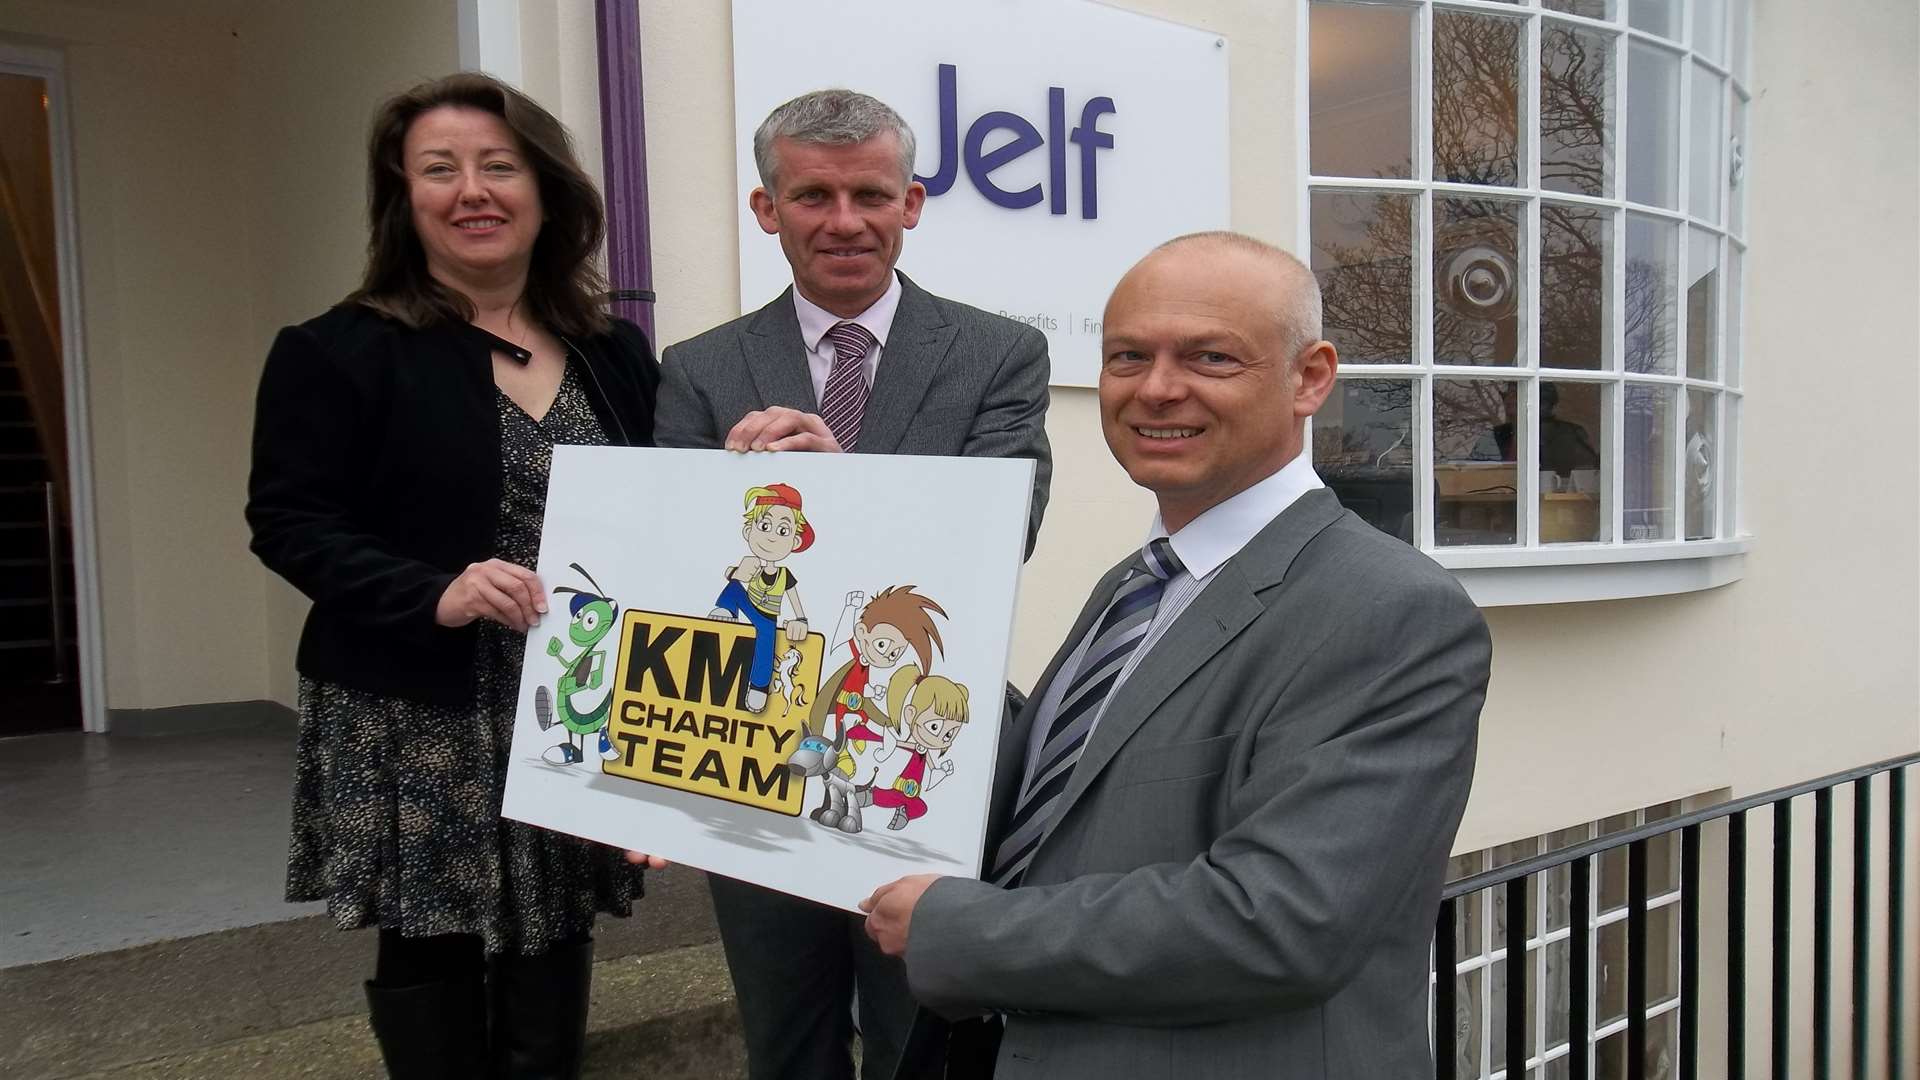 Jane Lawrence, John Cox and Gareth Roberts of Jelf Insurance Brokers are to support the annual KM Charity Team Forum being staged to brief the charitable sector in Kent on the professional services available to assist their work